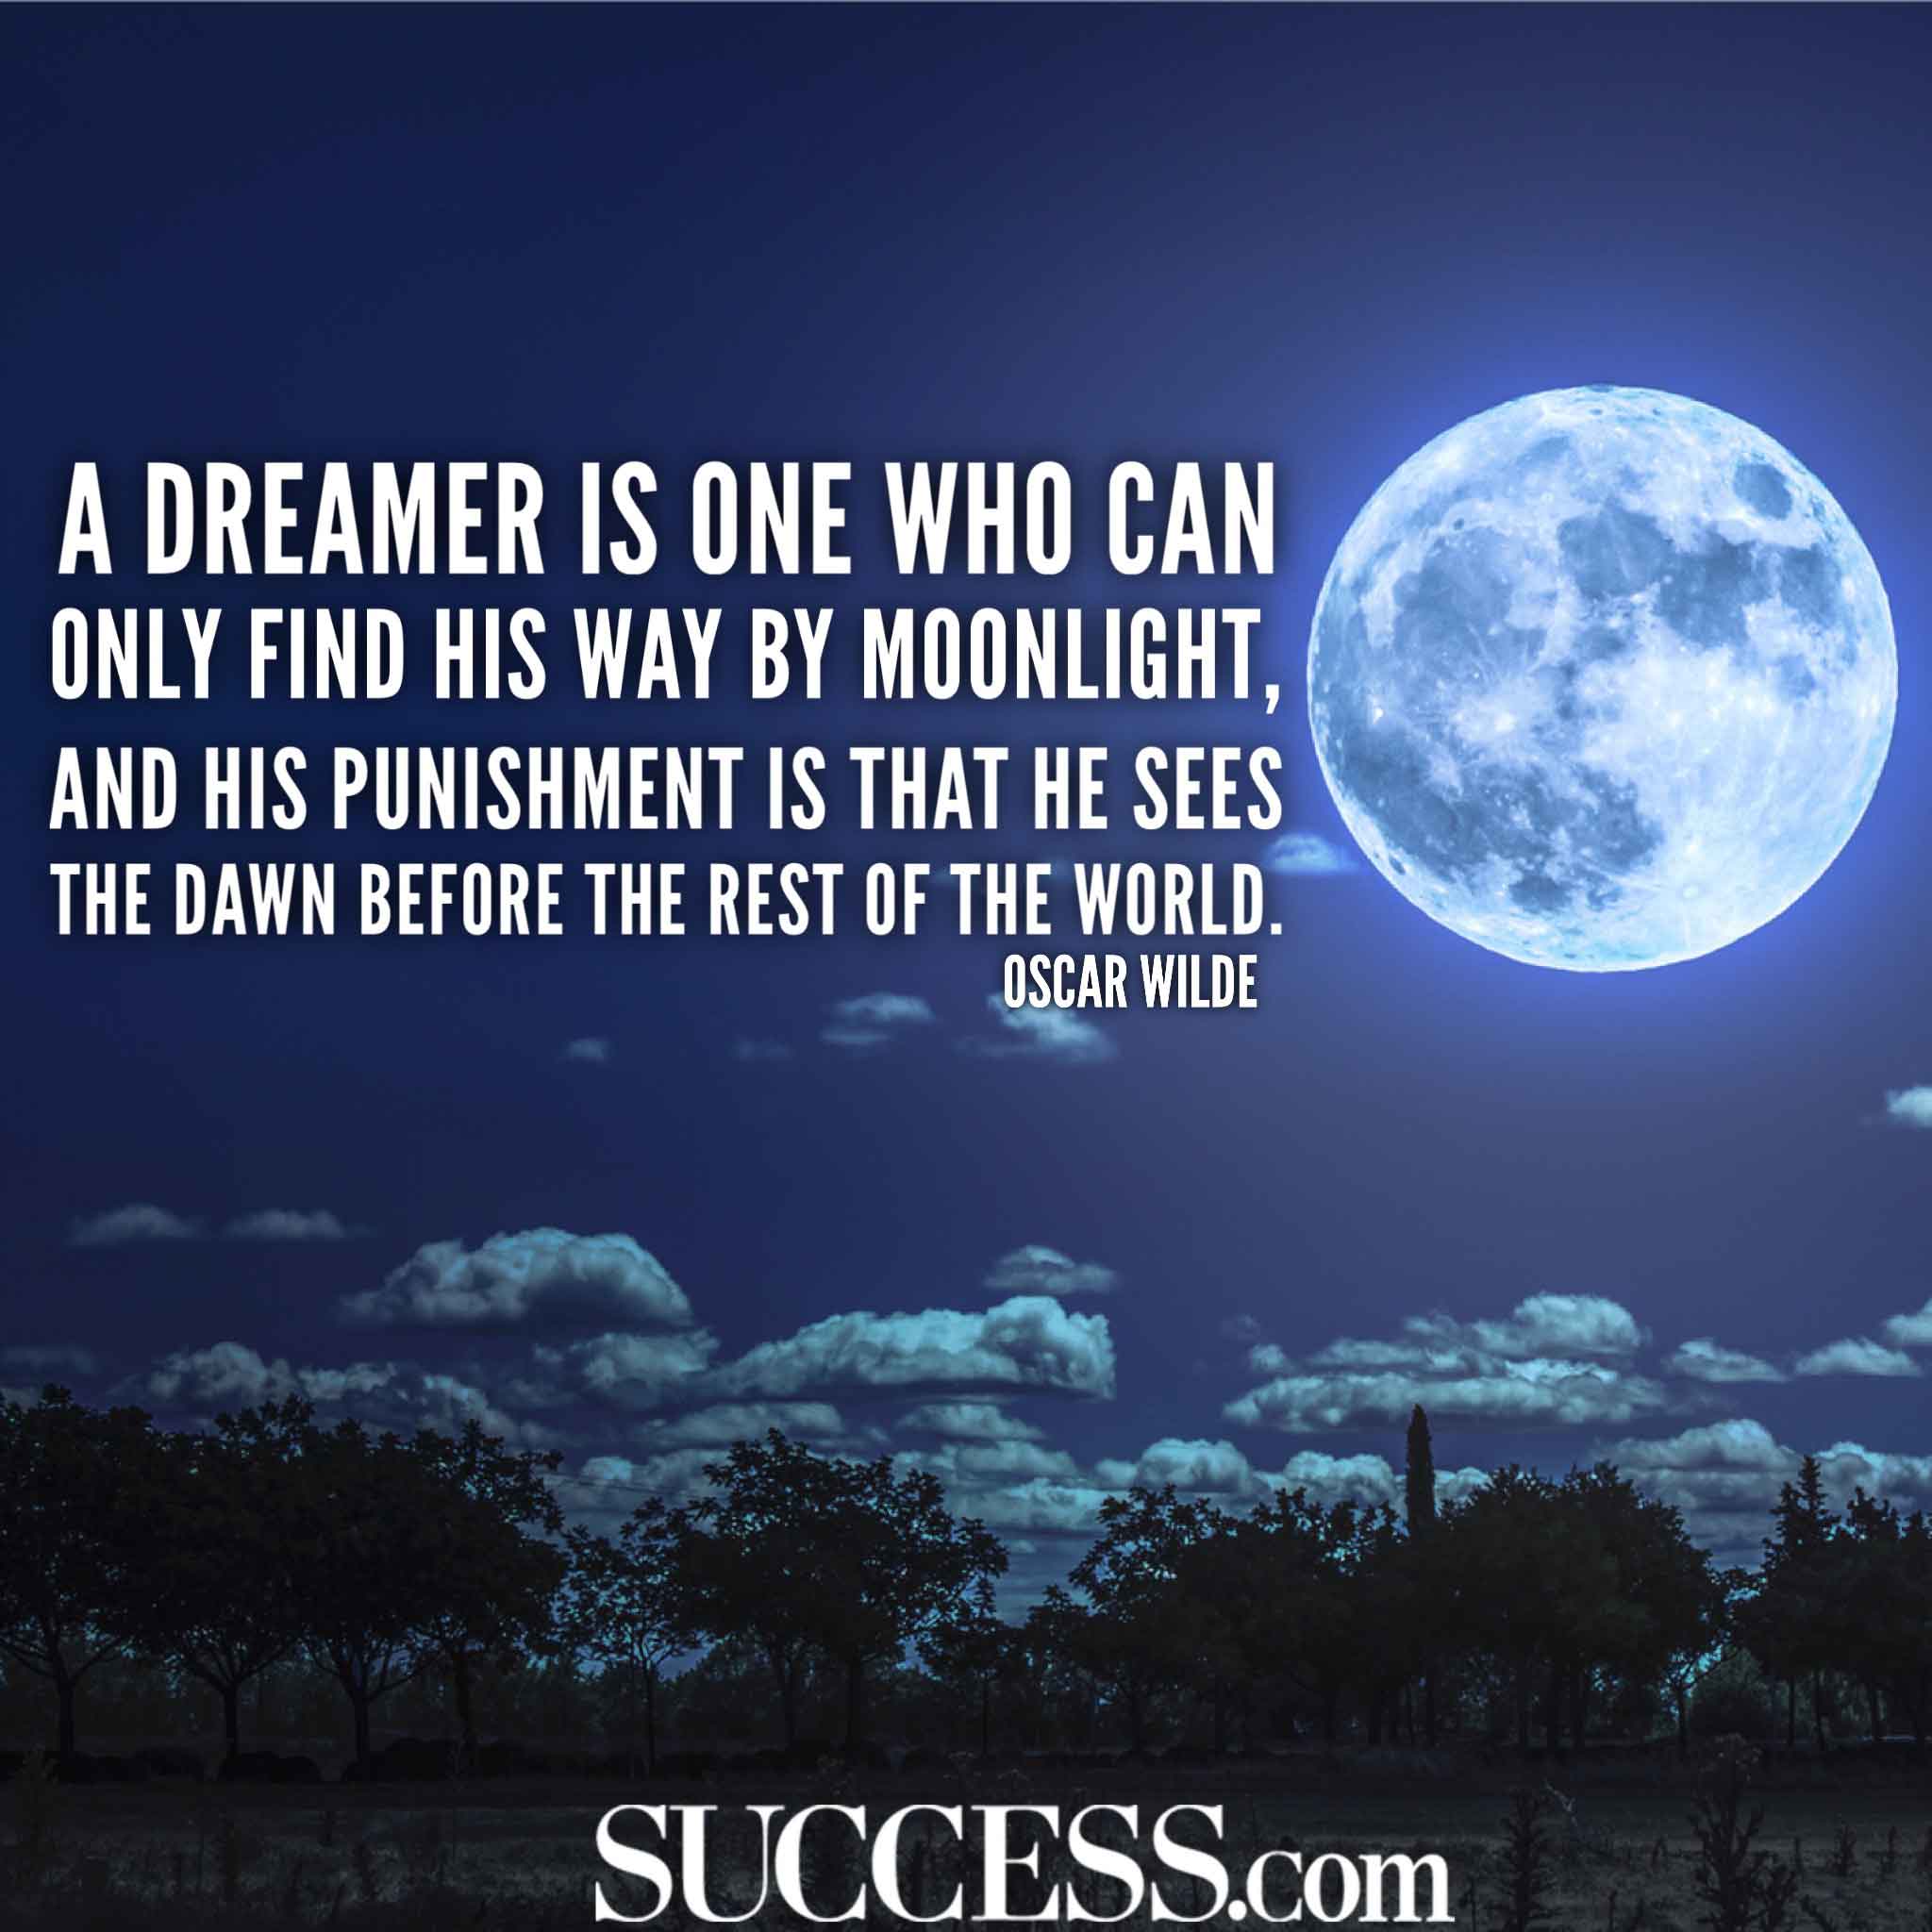 15 Inspiring Quotes About Being a Dreamer